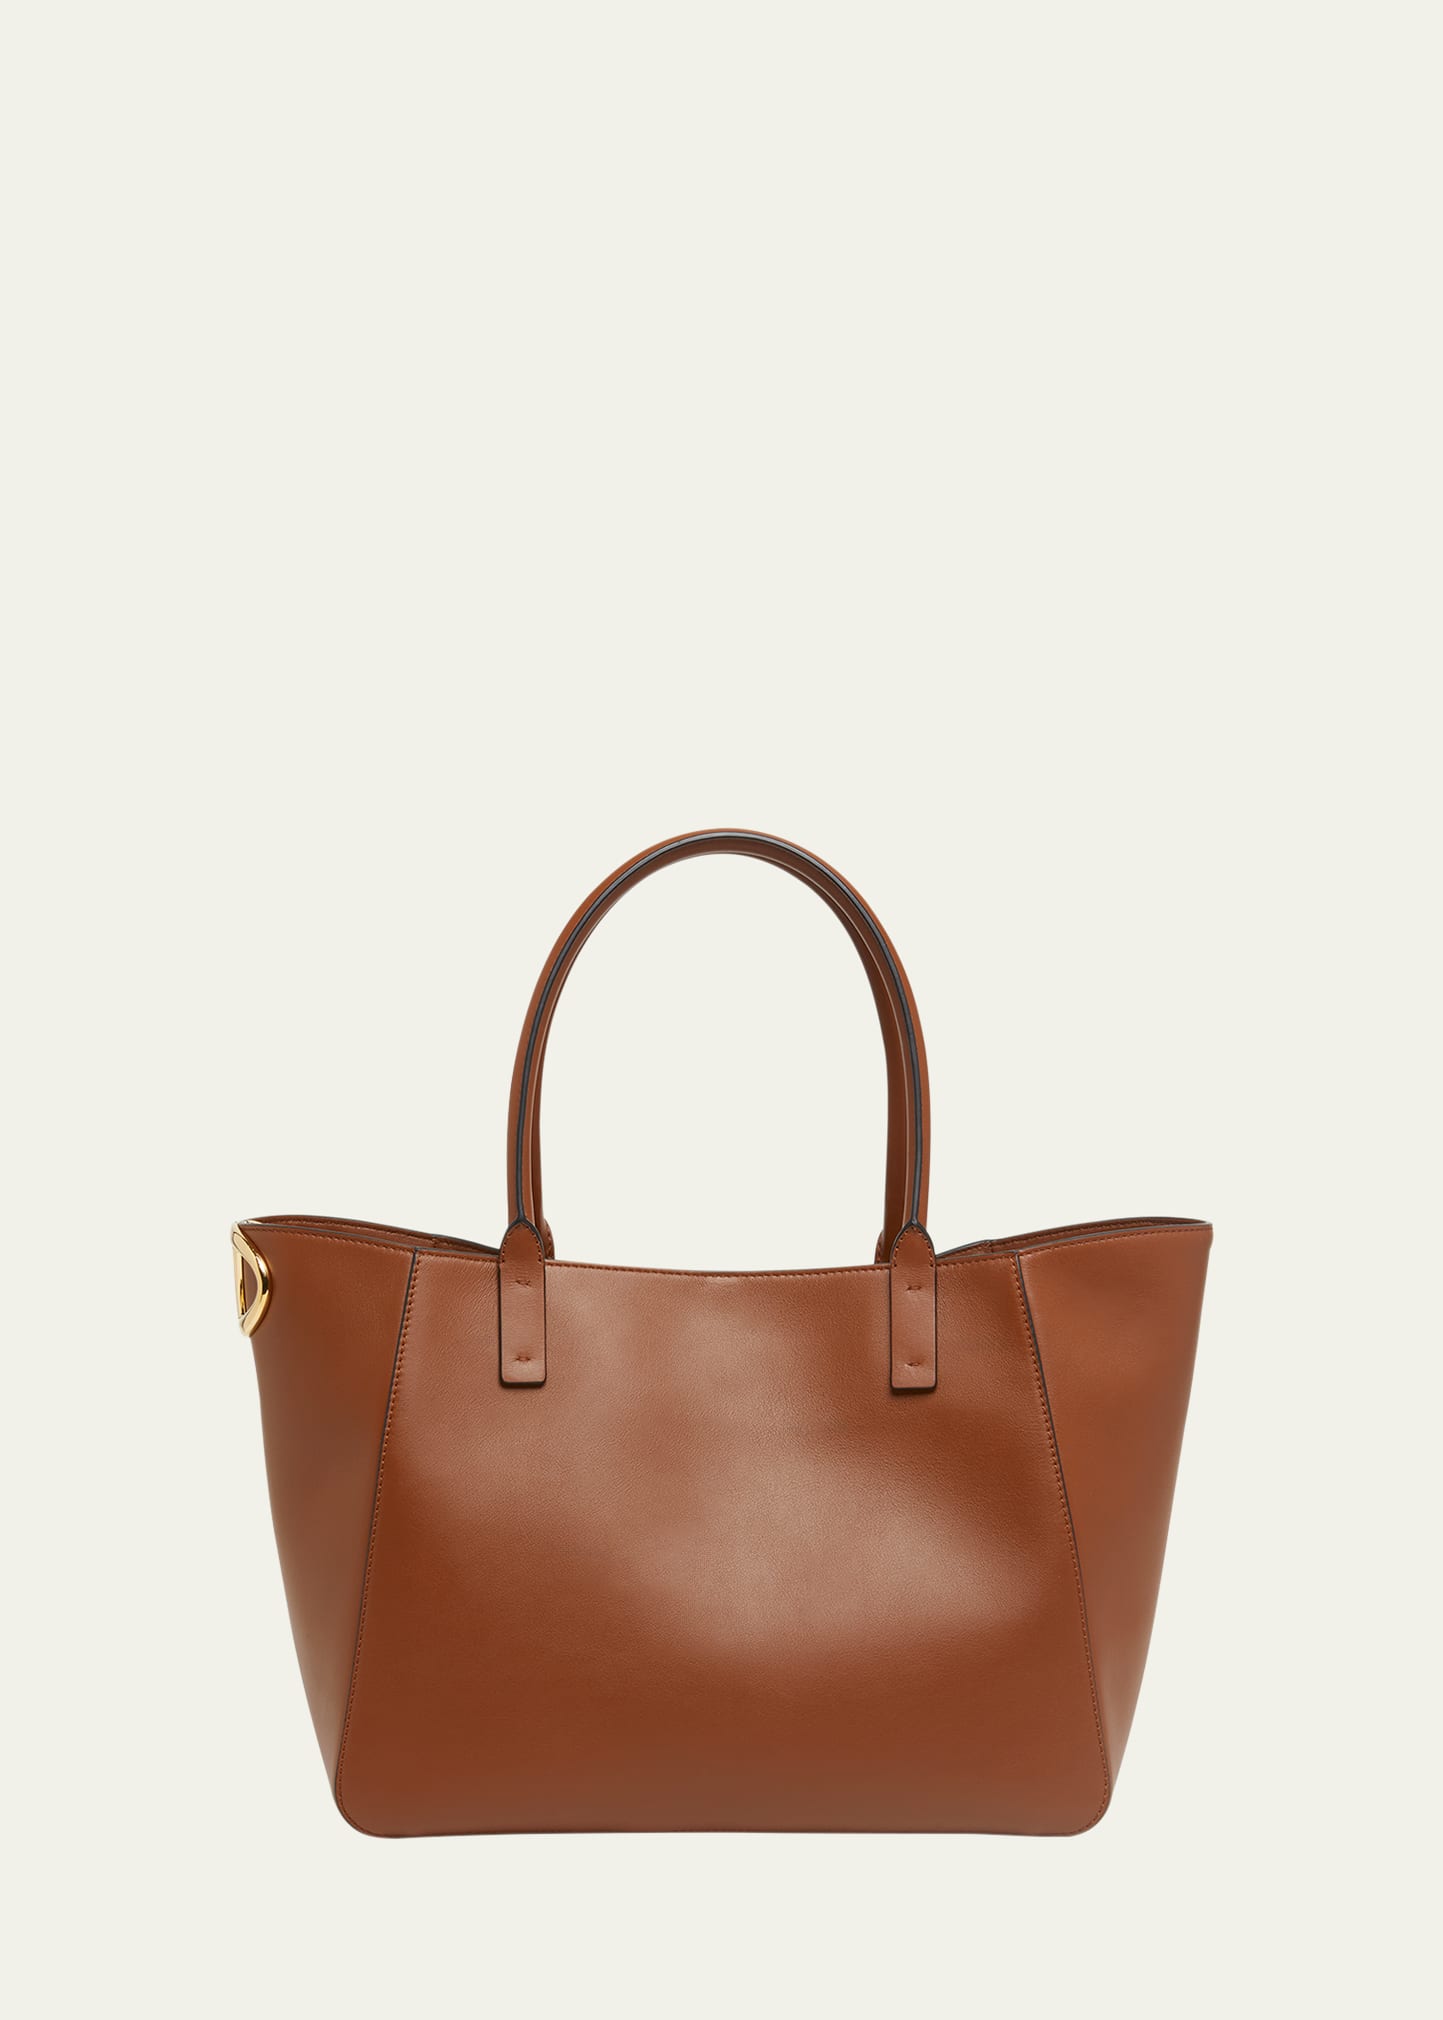 VLOGO Side Shopping Tote Bag in Nappa Calfskin Leather